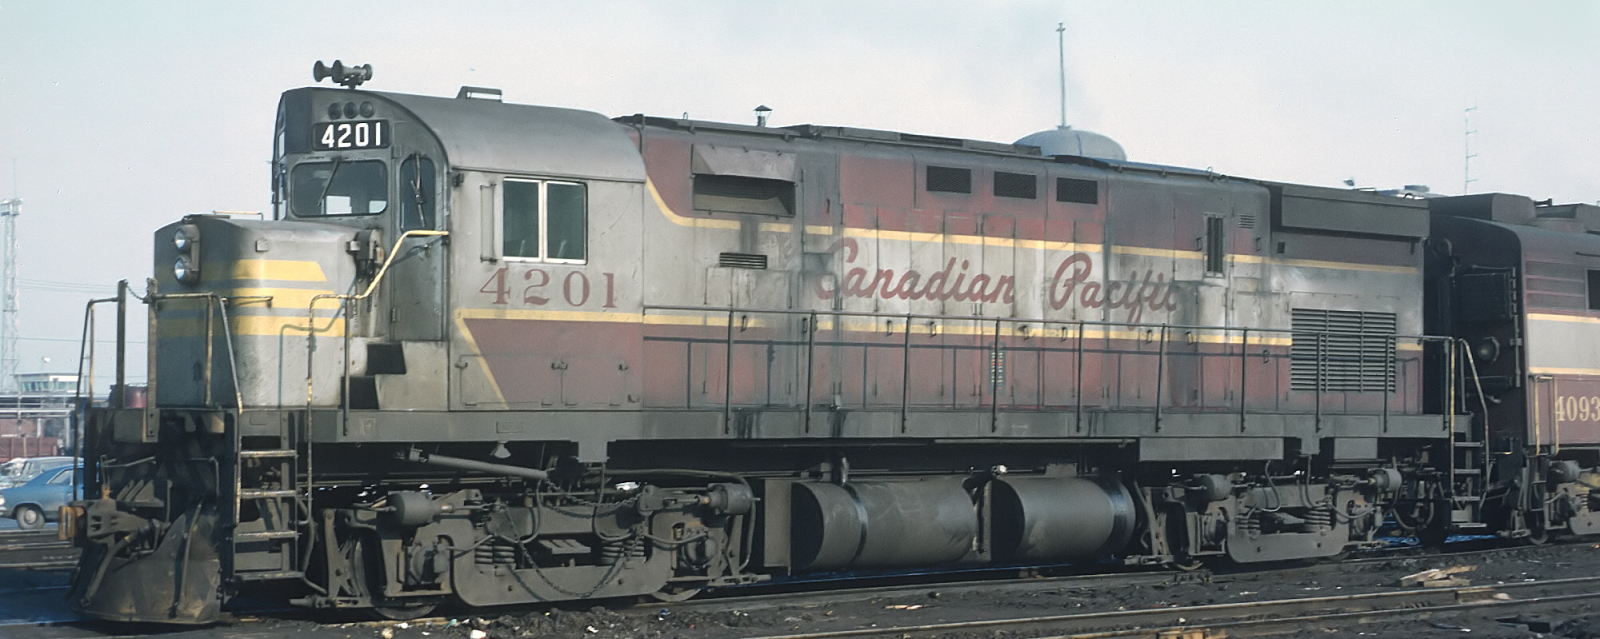 Canadian Pacific C424 No. 4201 in March 1970 at Col Ste. Luc, Montreal